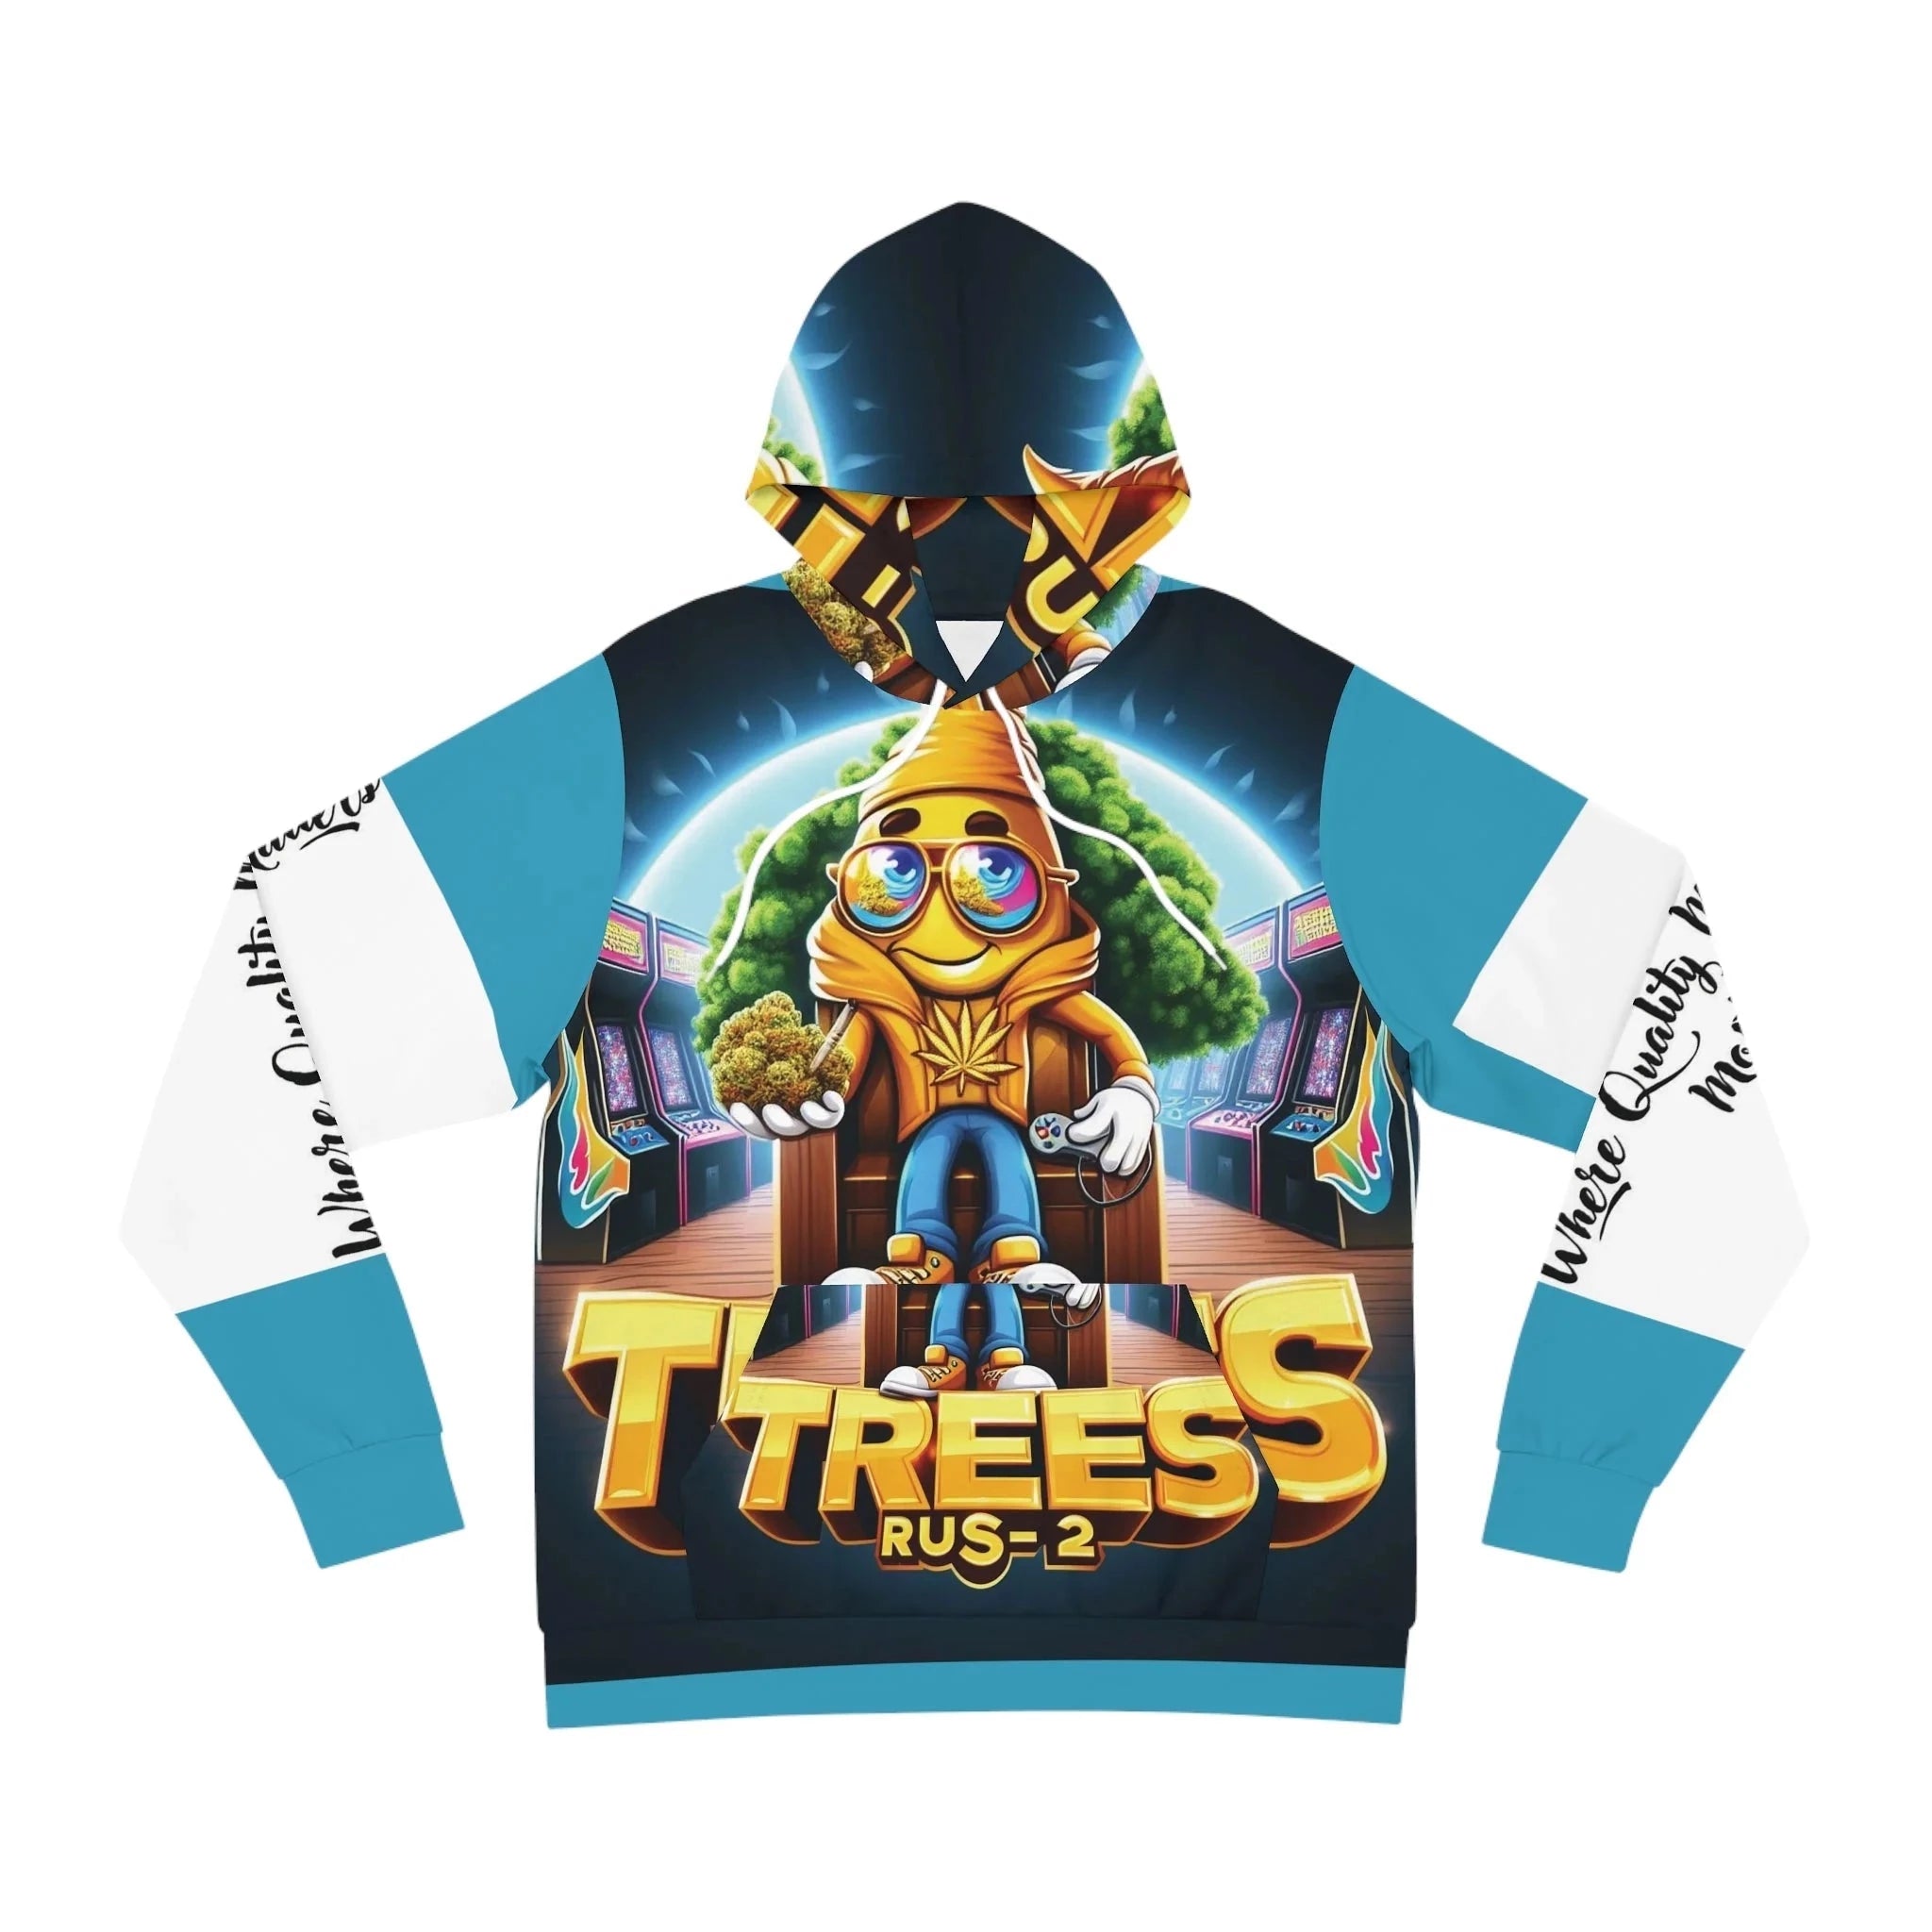 "Space Explorer” Gaming Hoodie with “TREES R US-2” Graphic - TRU2 Clothing